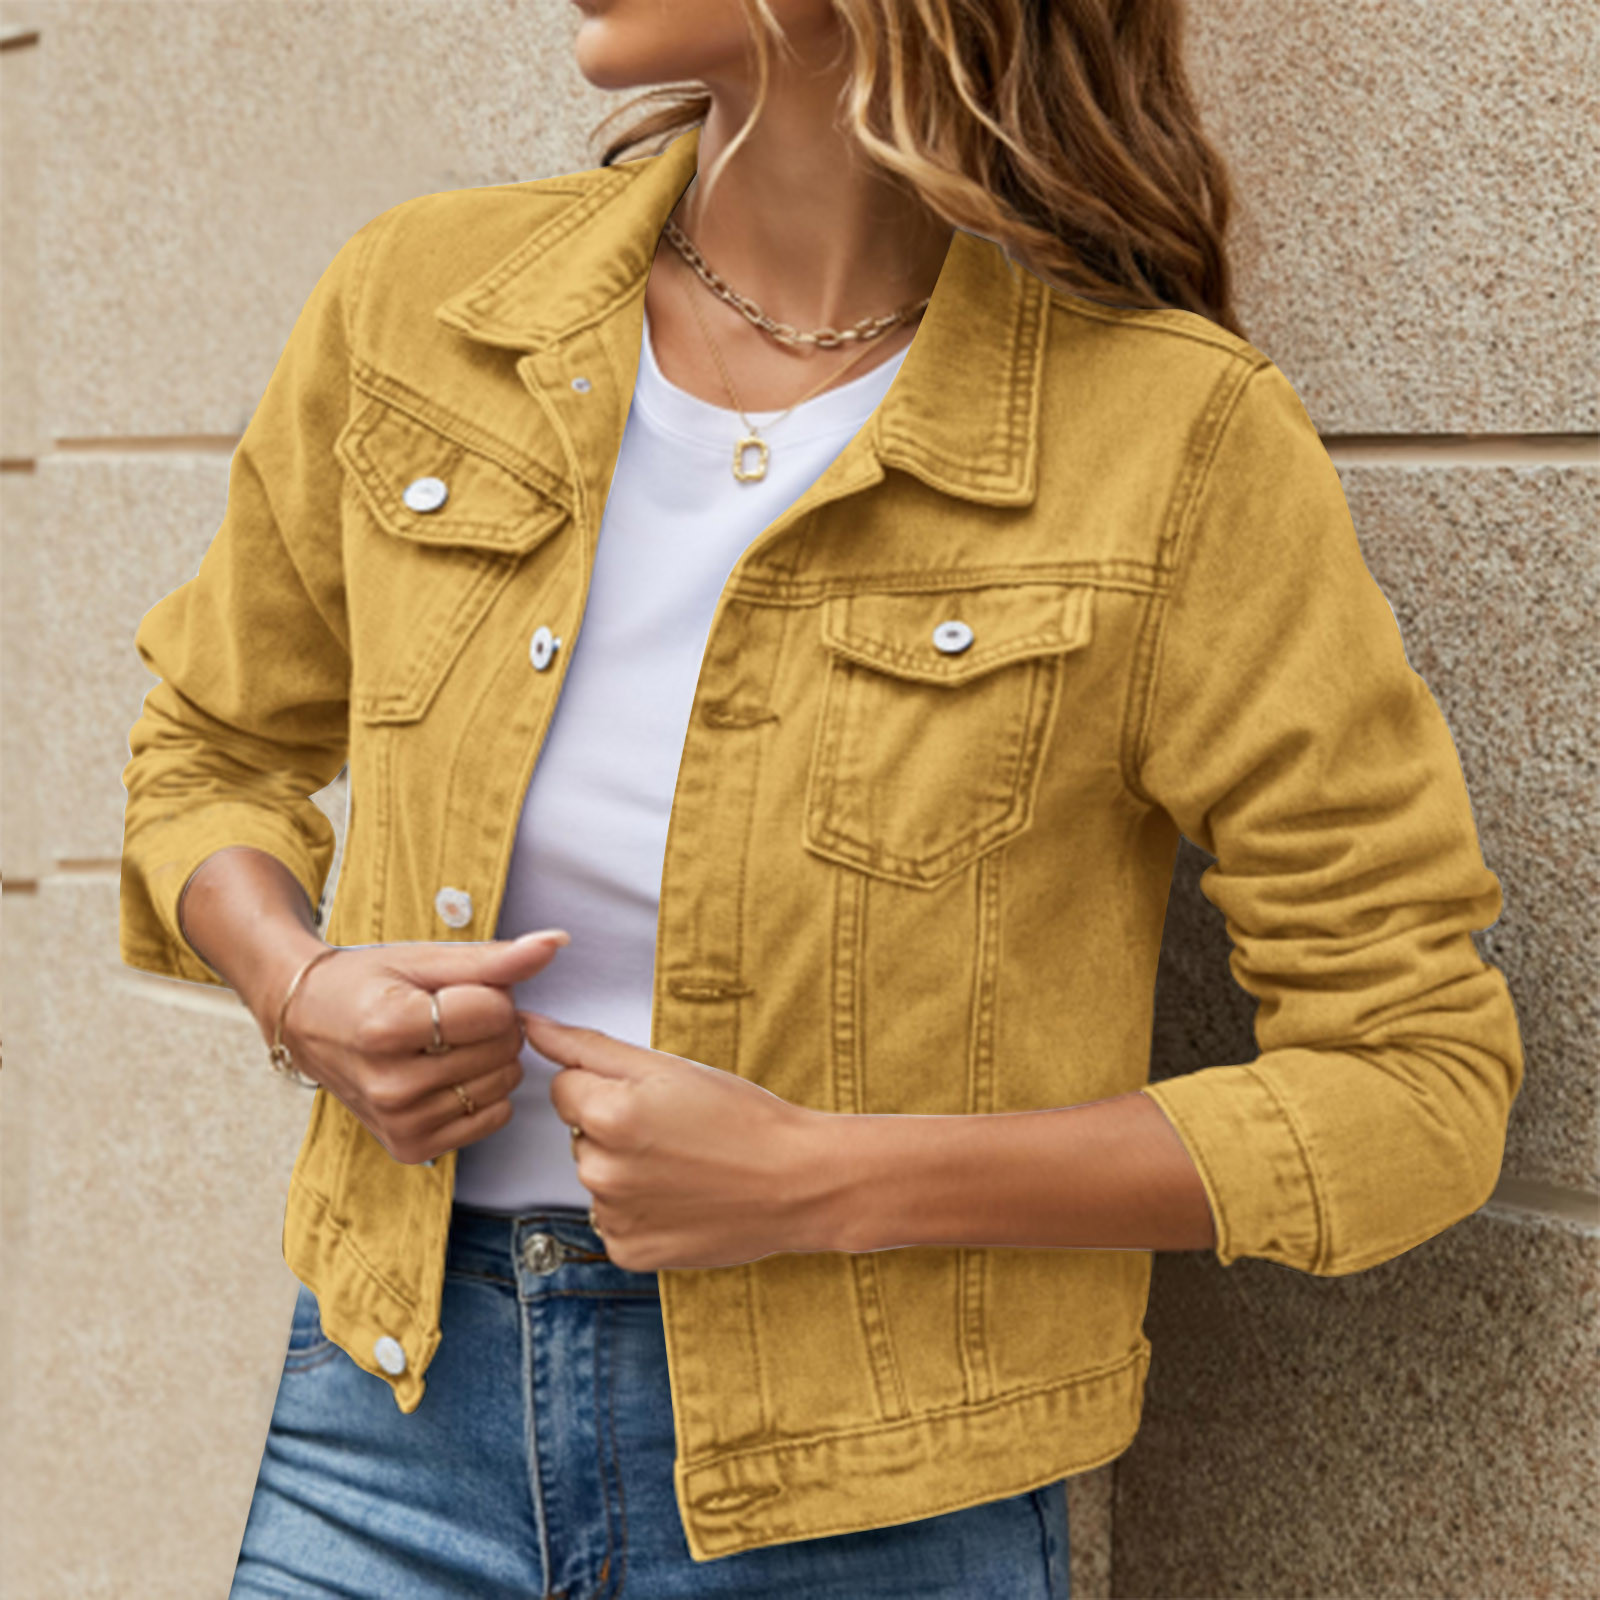 iOPQO womens sweaters Women's Basic Solid Color Button Down Denim Cotton Jacket With Pockets Denim Jacket Coat Women's Denim Jackets Yellow M - image 2 of 8